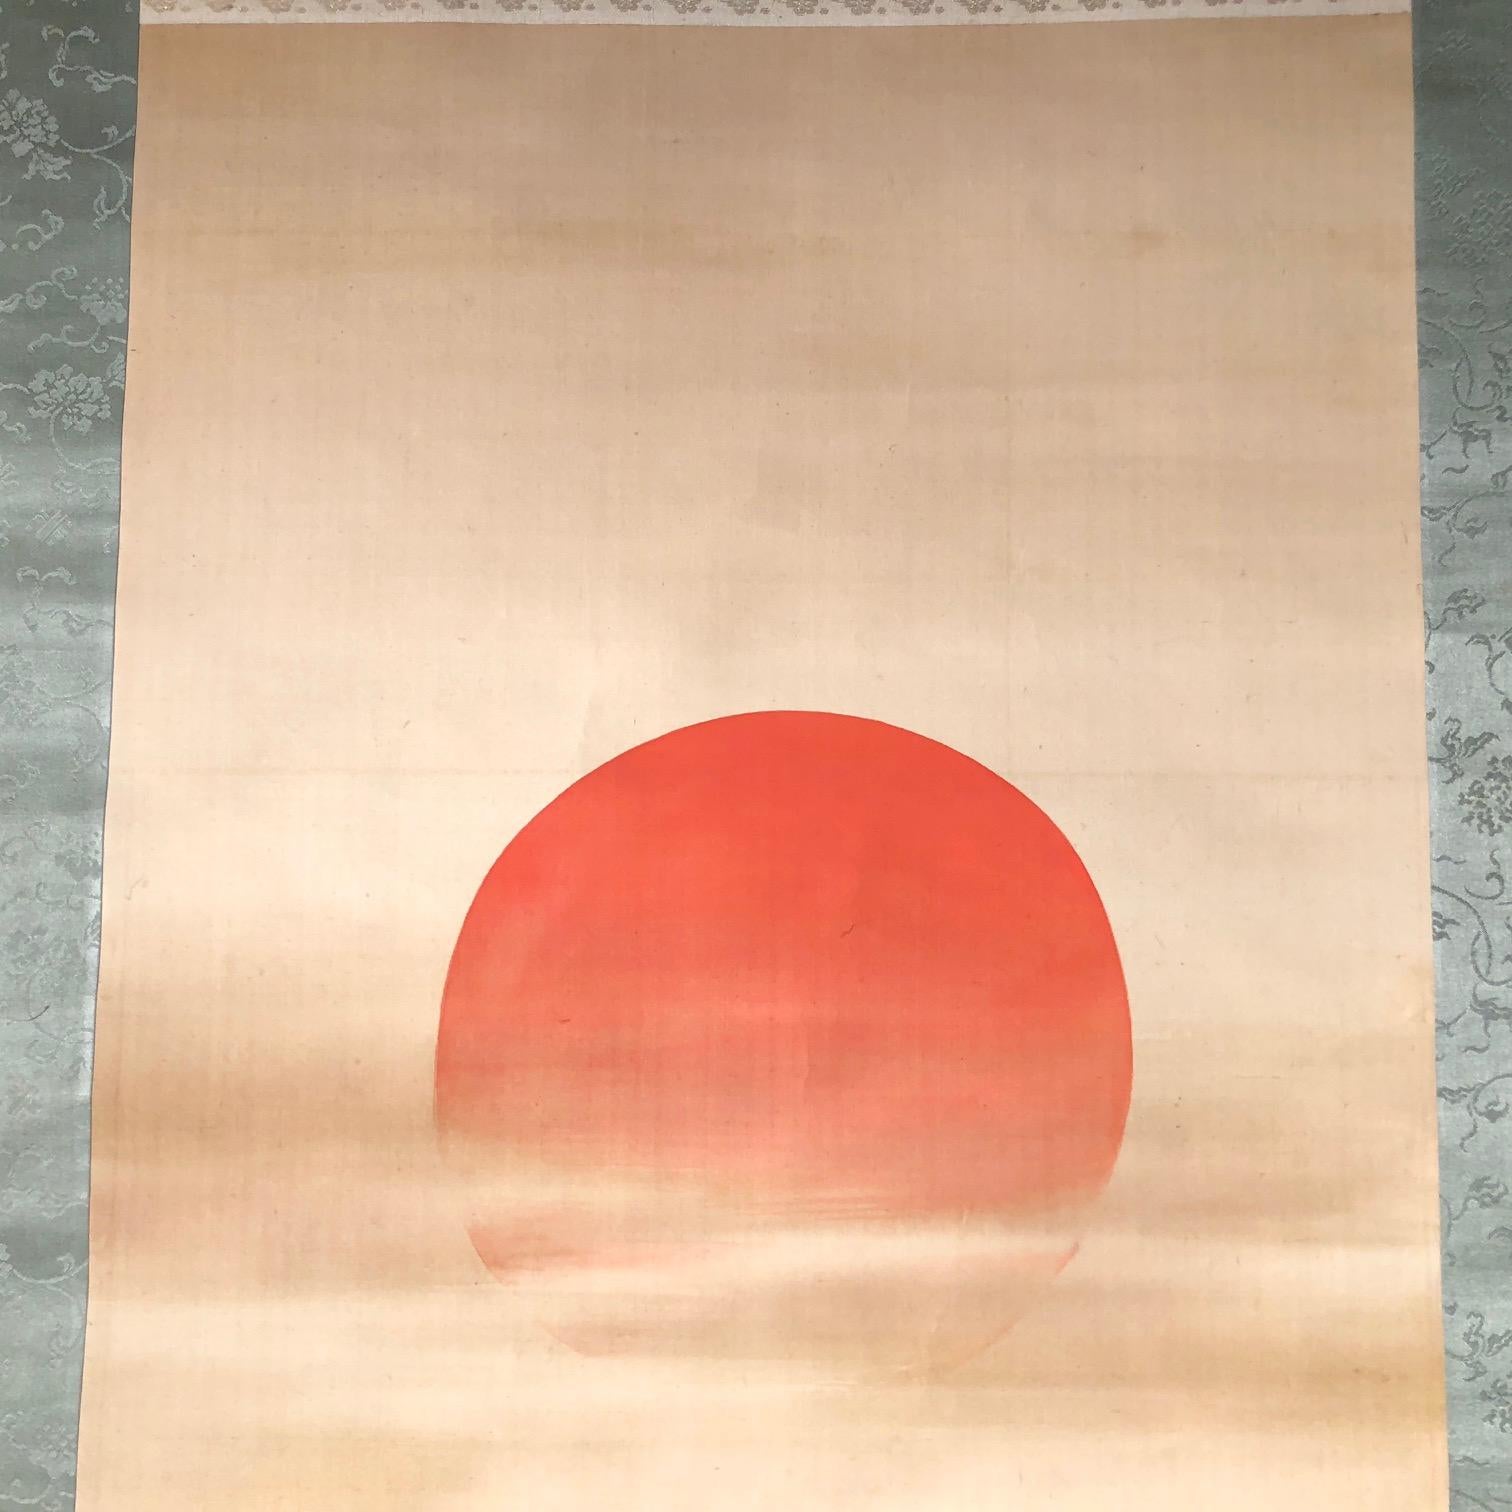 A very fine Japanese antique hand-painted silk scroll of sun and waves dating to the early 20th century, late Meiji period 1900.
Hand painting in lovely simple colors, signed.

Inscription:
sun
Back: celebration of the sun
Baikou
Wood